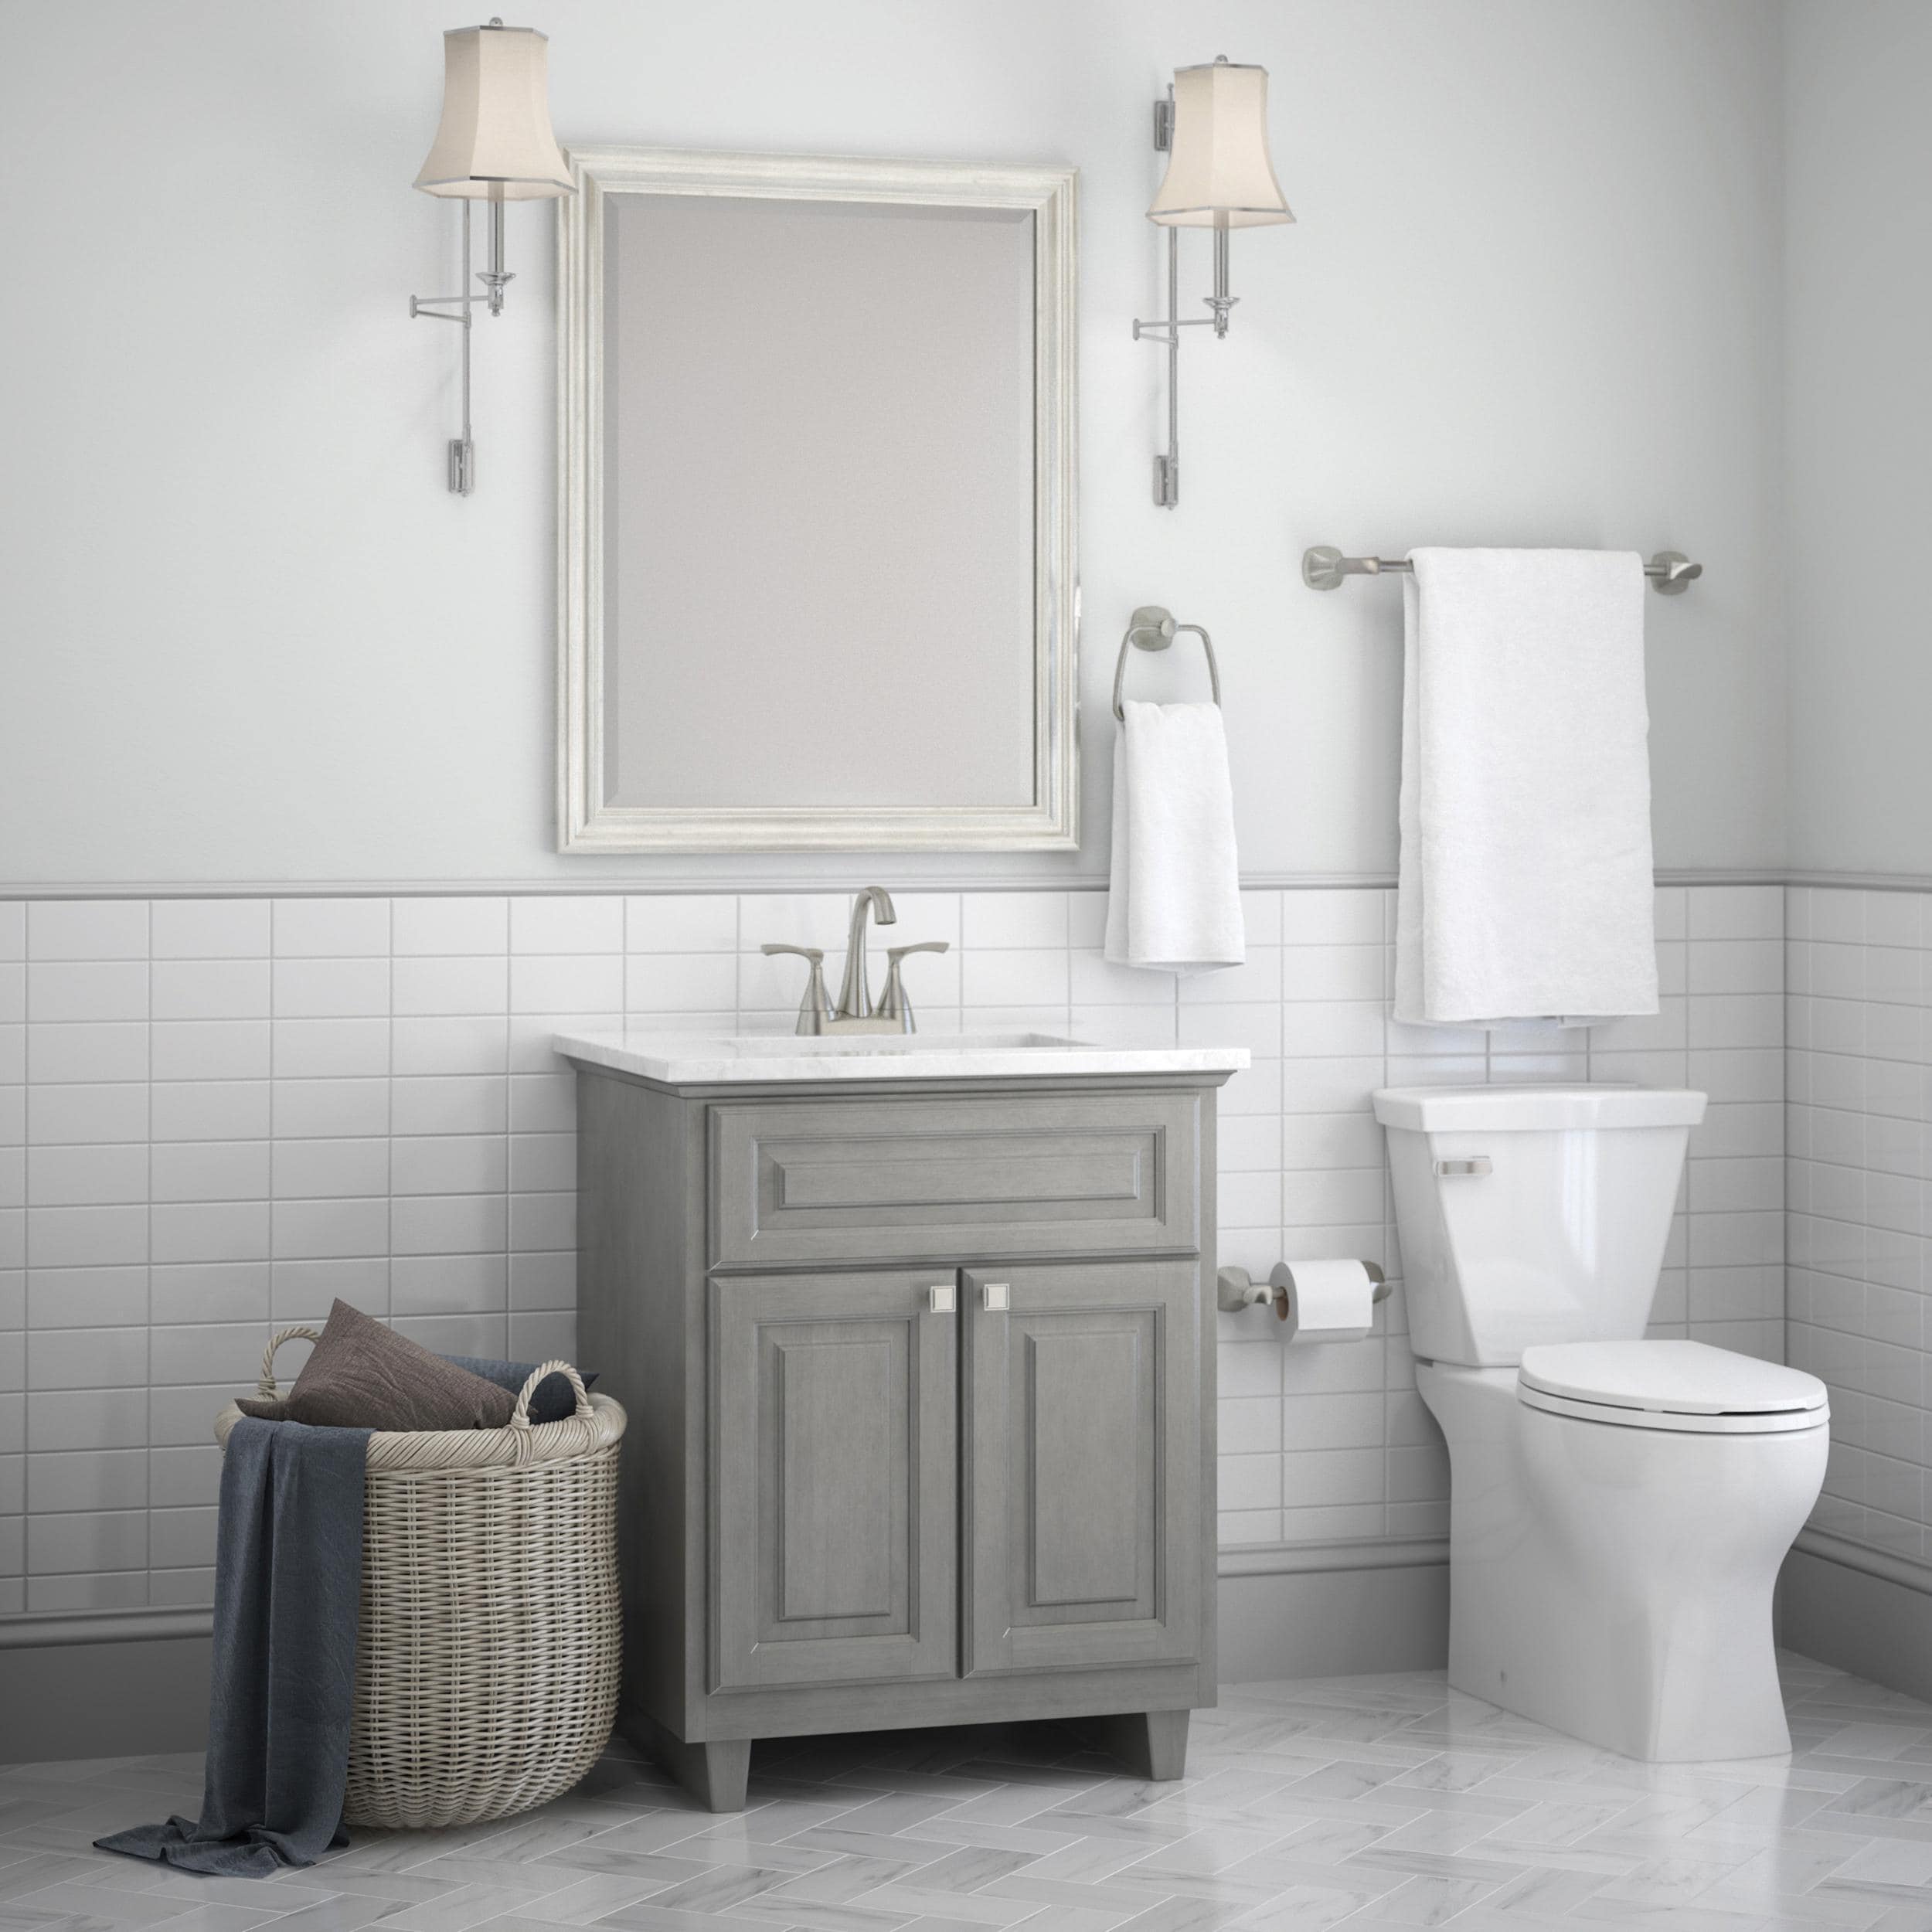 Sonoma Goods For Life® Brushed Nickel Bathroom Accessories Collection